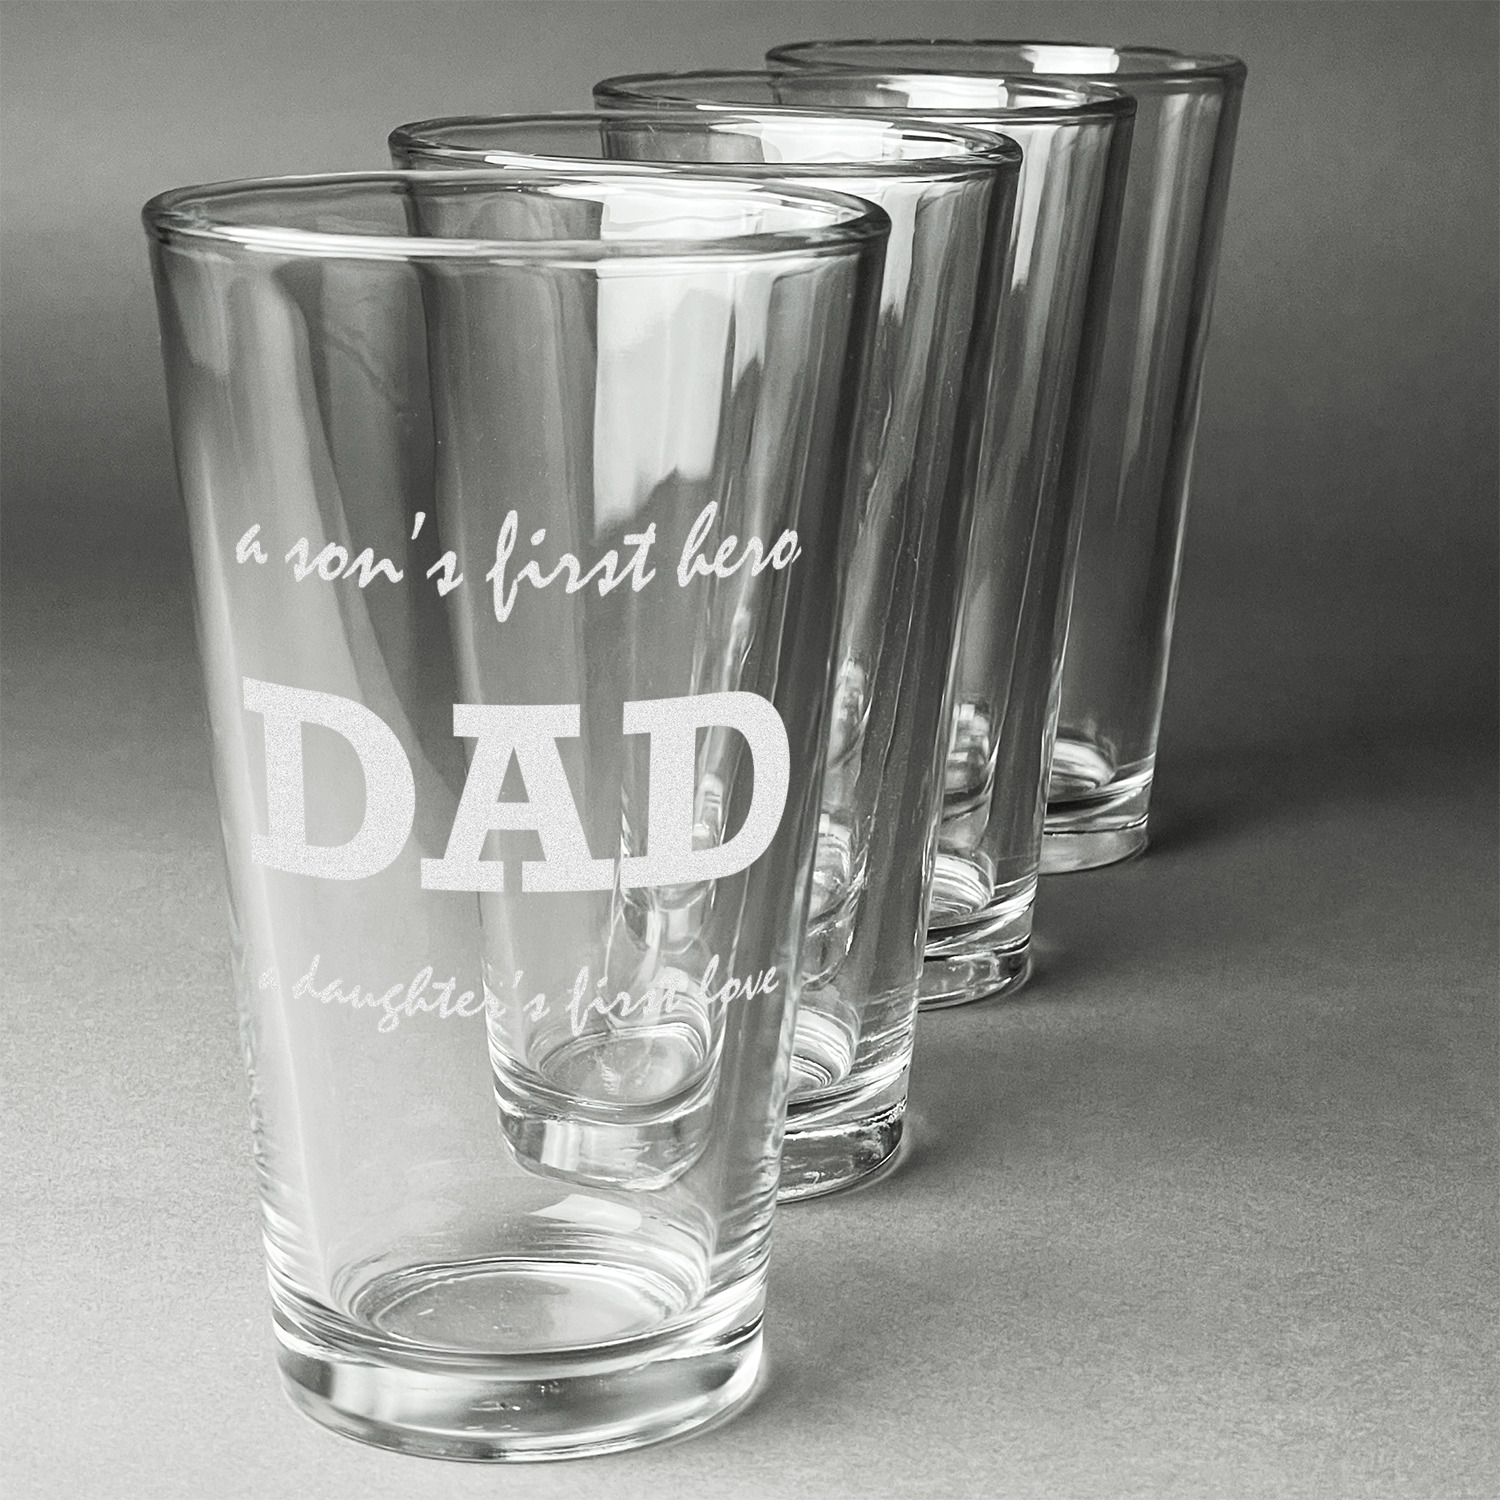 Father's Day Quotes & Sayings Beer Glasses (Set of 4) (Personalized) YouCustomizeIt